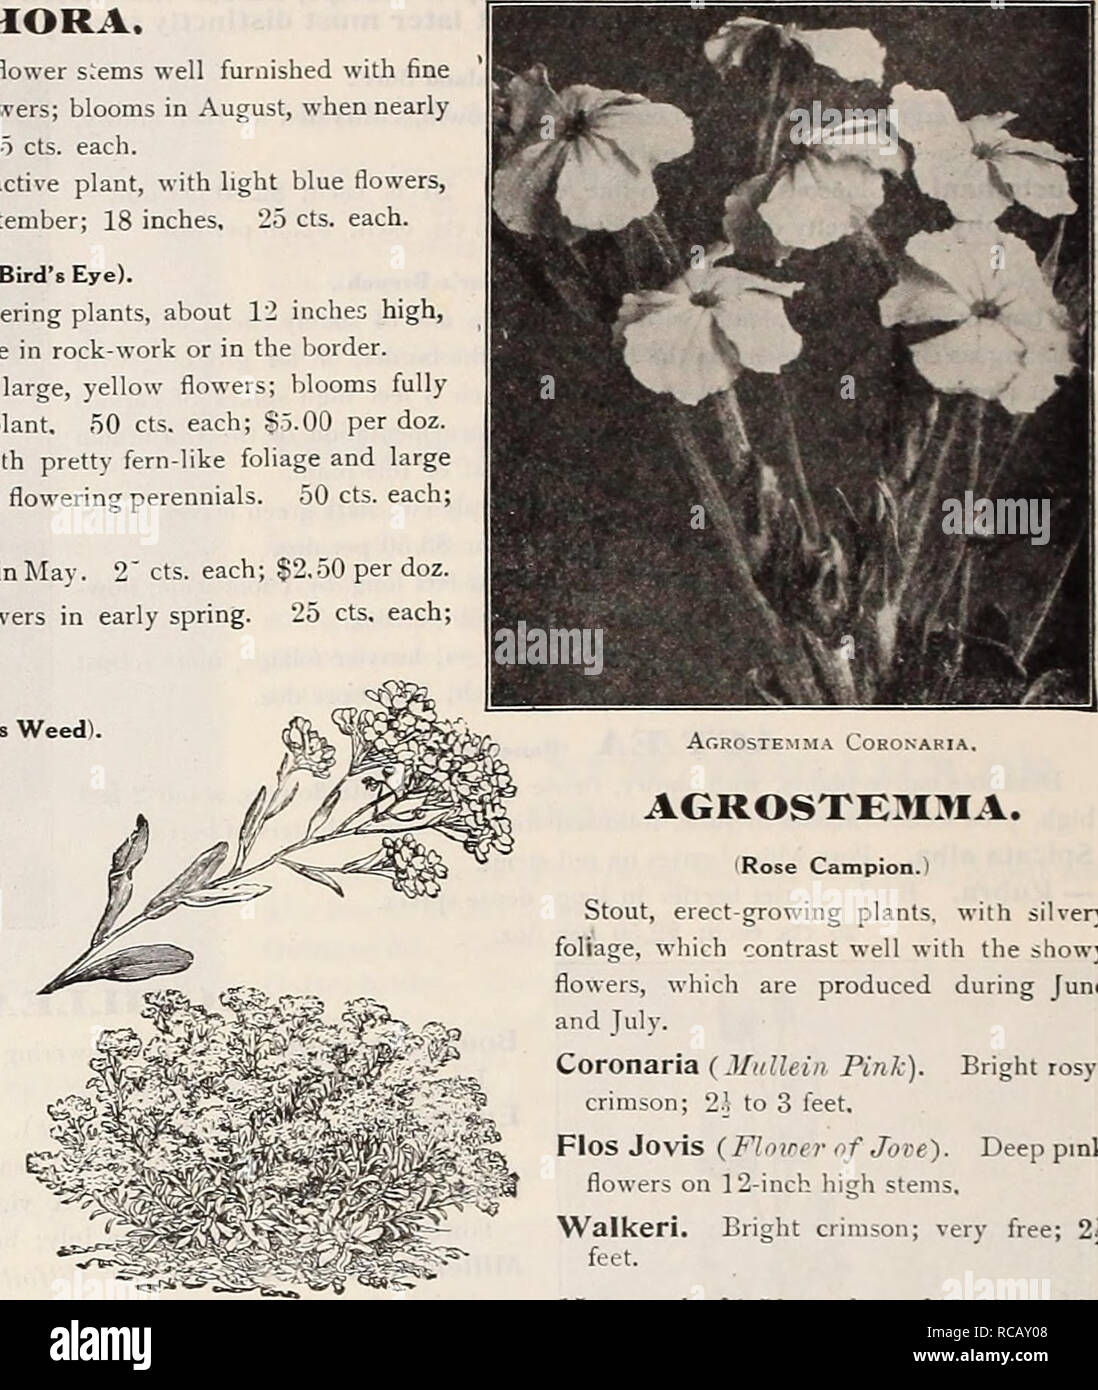 . Dreer's garden book : seventy-third annual edition 1911. Seeds Catalogs; Nursery stock Catalogs; Gardening Equipment and supplies Catalogs; Flowers Seeds Catalogs; Vegetables Seeds Catalogs; Fruit Seeds Catalogs. 204 HI IrtlMADREER WlllADELPHIA^^f HARDY-PERfNMIAL PLANTi ADENOPHORA, Polymorpha. A valuable variety, the flower stems well furnished with fine dark blue bell-shaped Campanula-like flowers; blooms in August, when nearly- all other bell flowers are over; 3 feet. 25 cts. each. Potanini. An easily-grown, useful, attractive plant, with light blue flowers, not unlike Canterbury bells; Ju Stock Photo